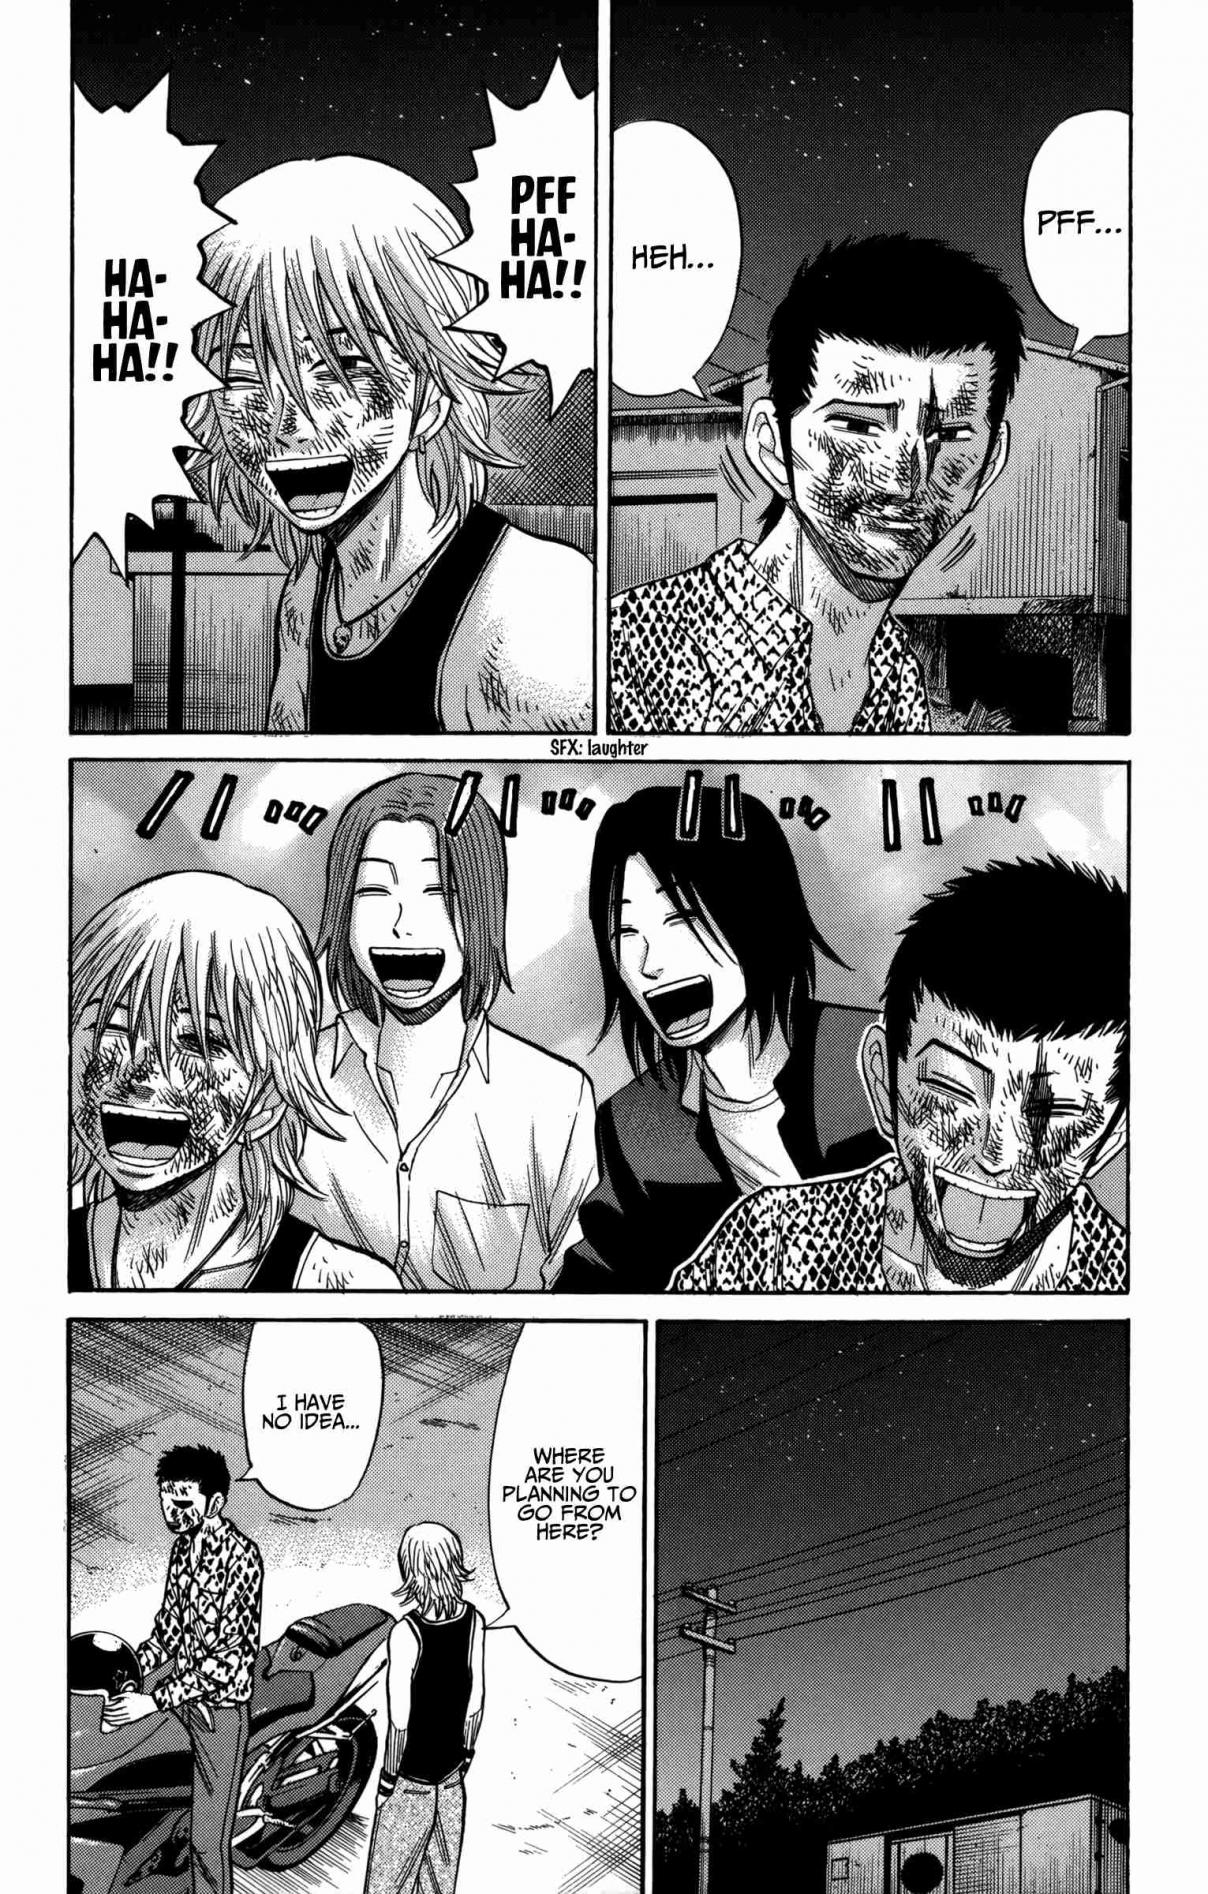 Nanba MG5 Vol. 7 Ch. 58 The Consequences of Fighting